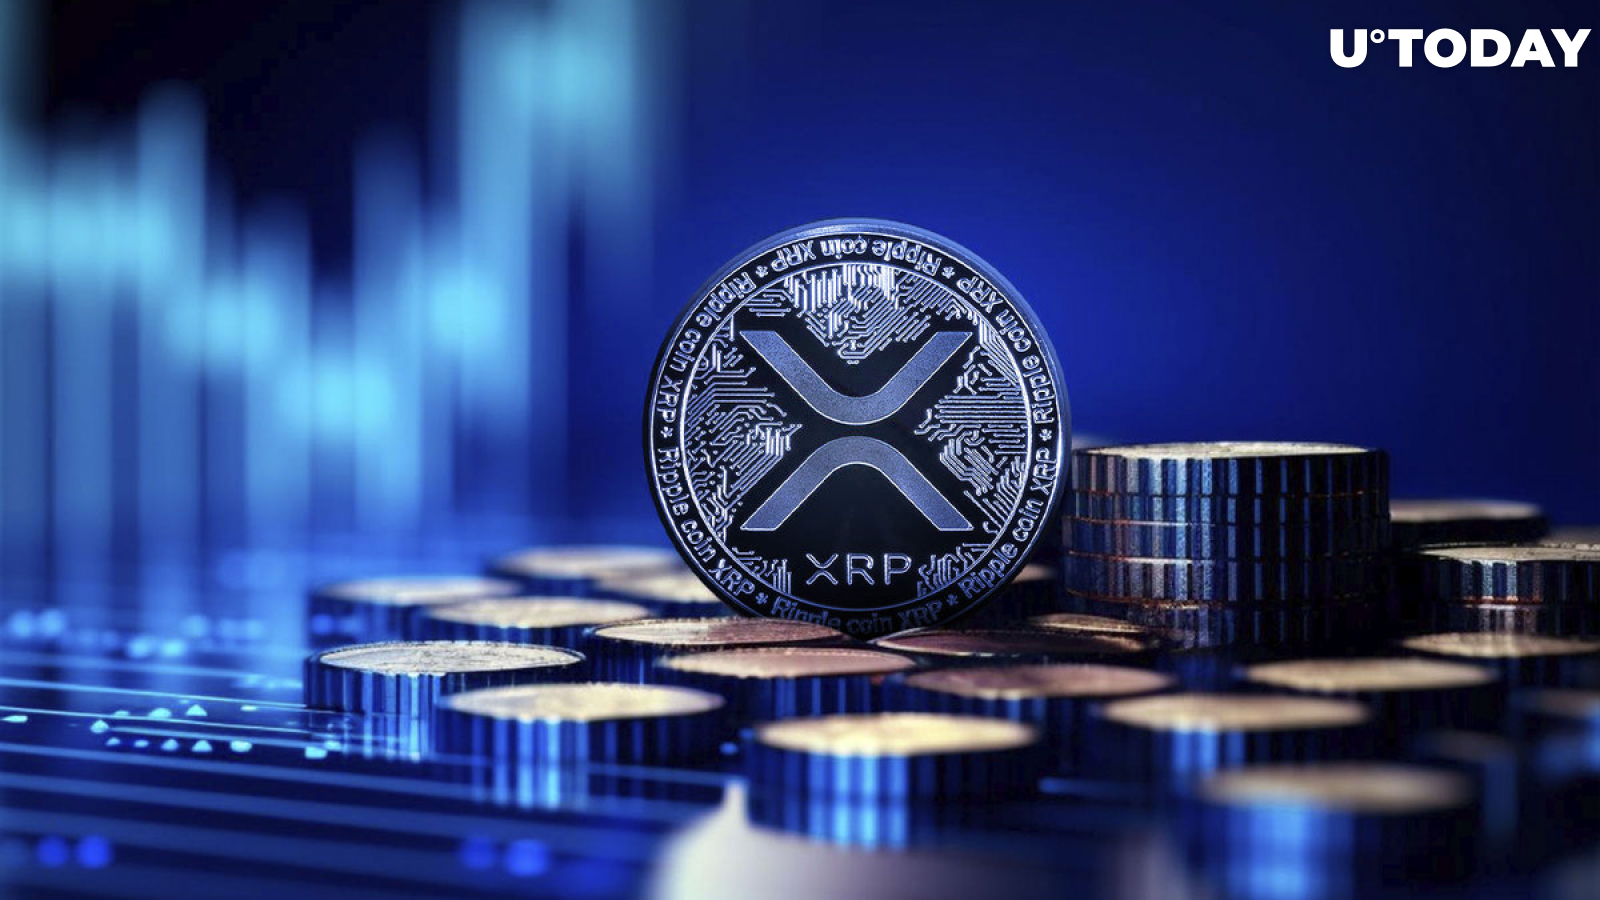 XRP Makes Huge Jump, Achieves $1.6 Billion Trading Volume in 24 Hours